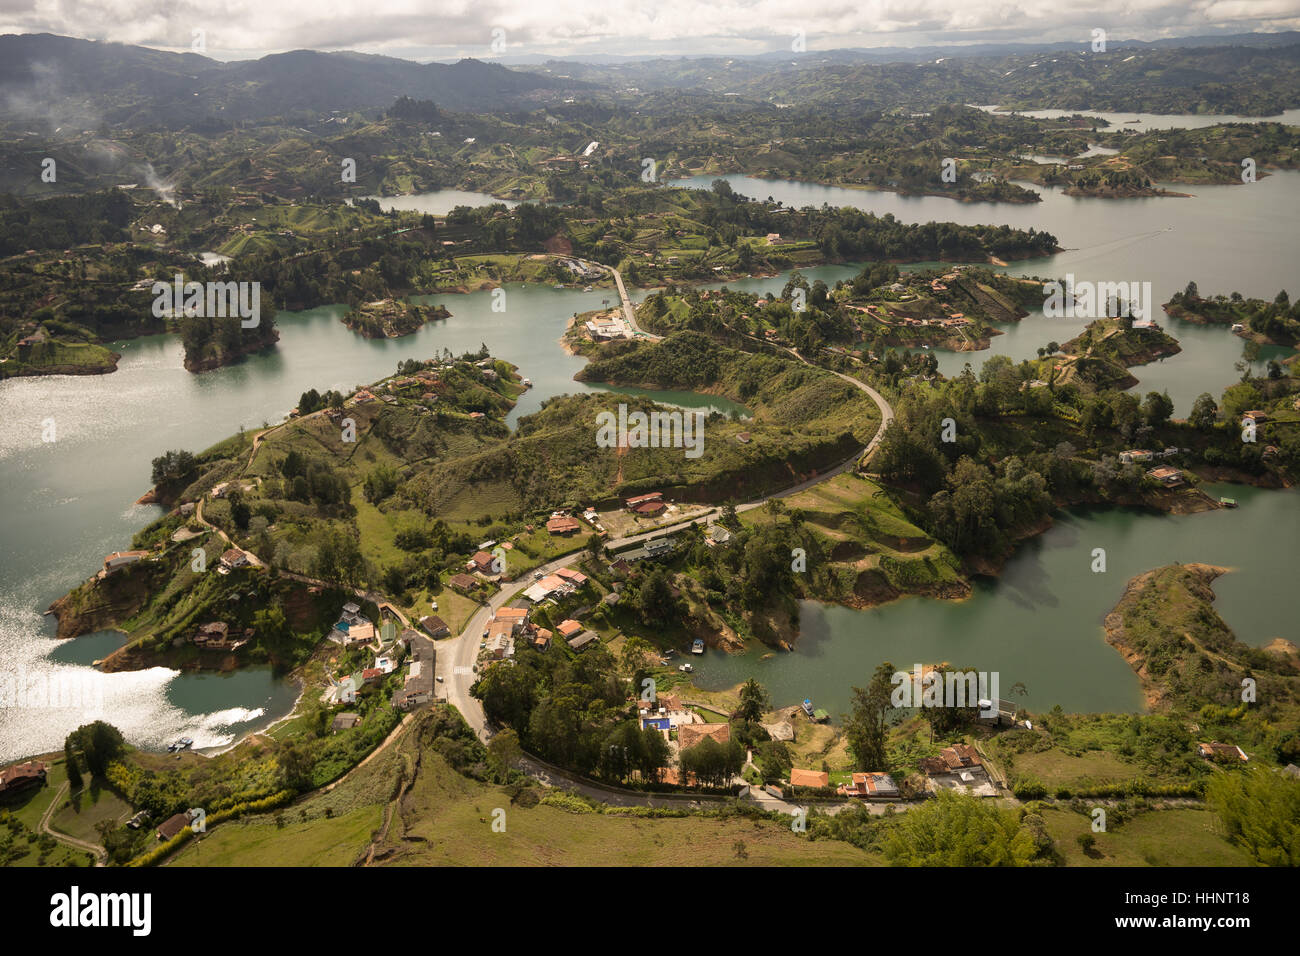 aerial view of a residential area on the shore of the artificial lake Stock Photo